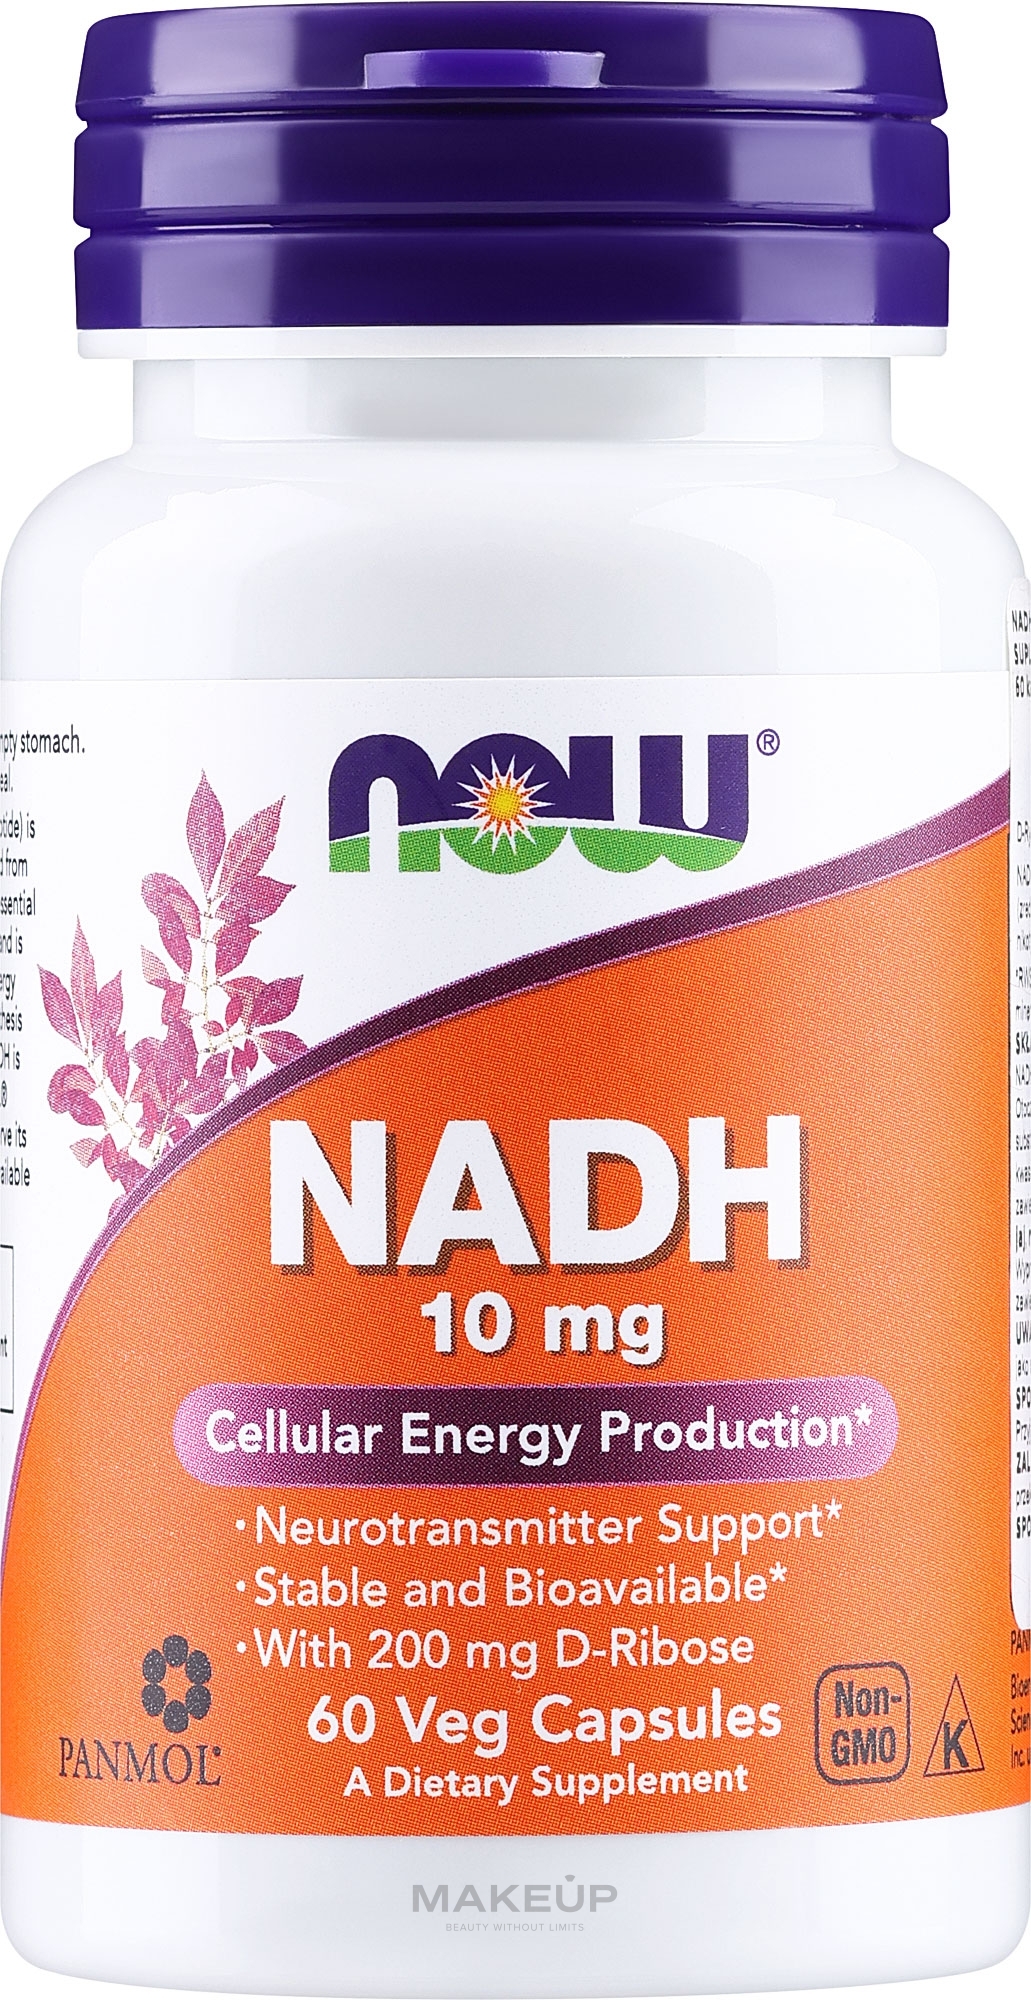 Suplement diety NADH 10 mg - Now Foods NADH Veg Capsules — Zdjęcie 60 szt.